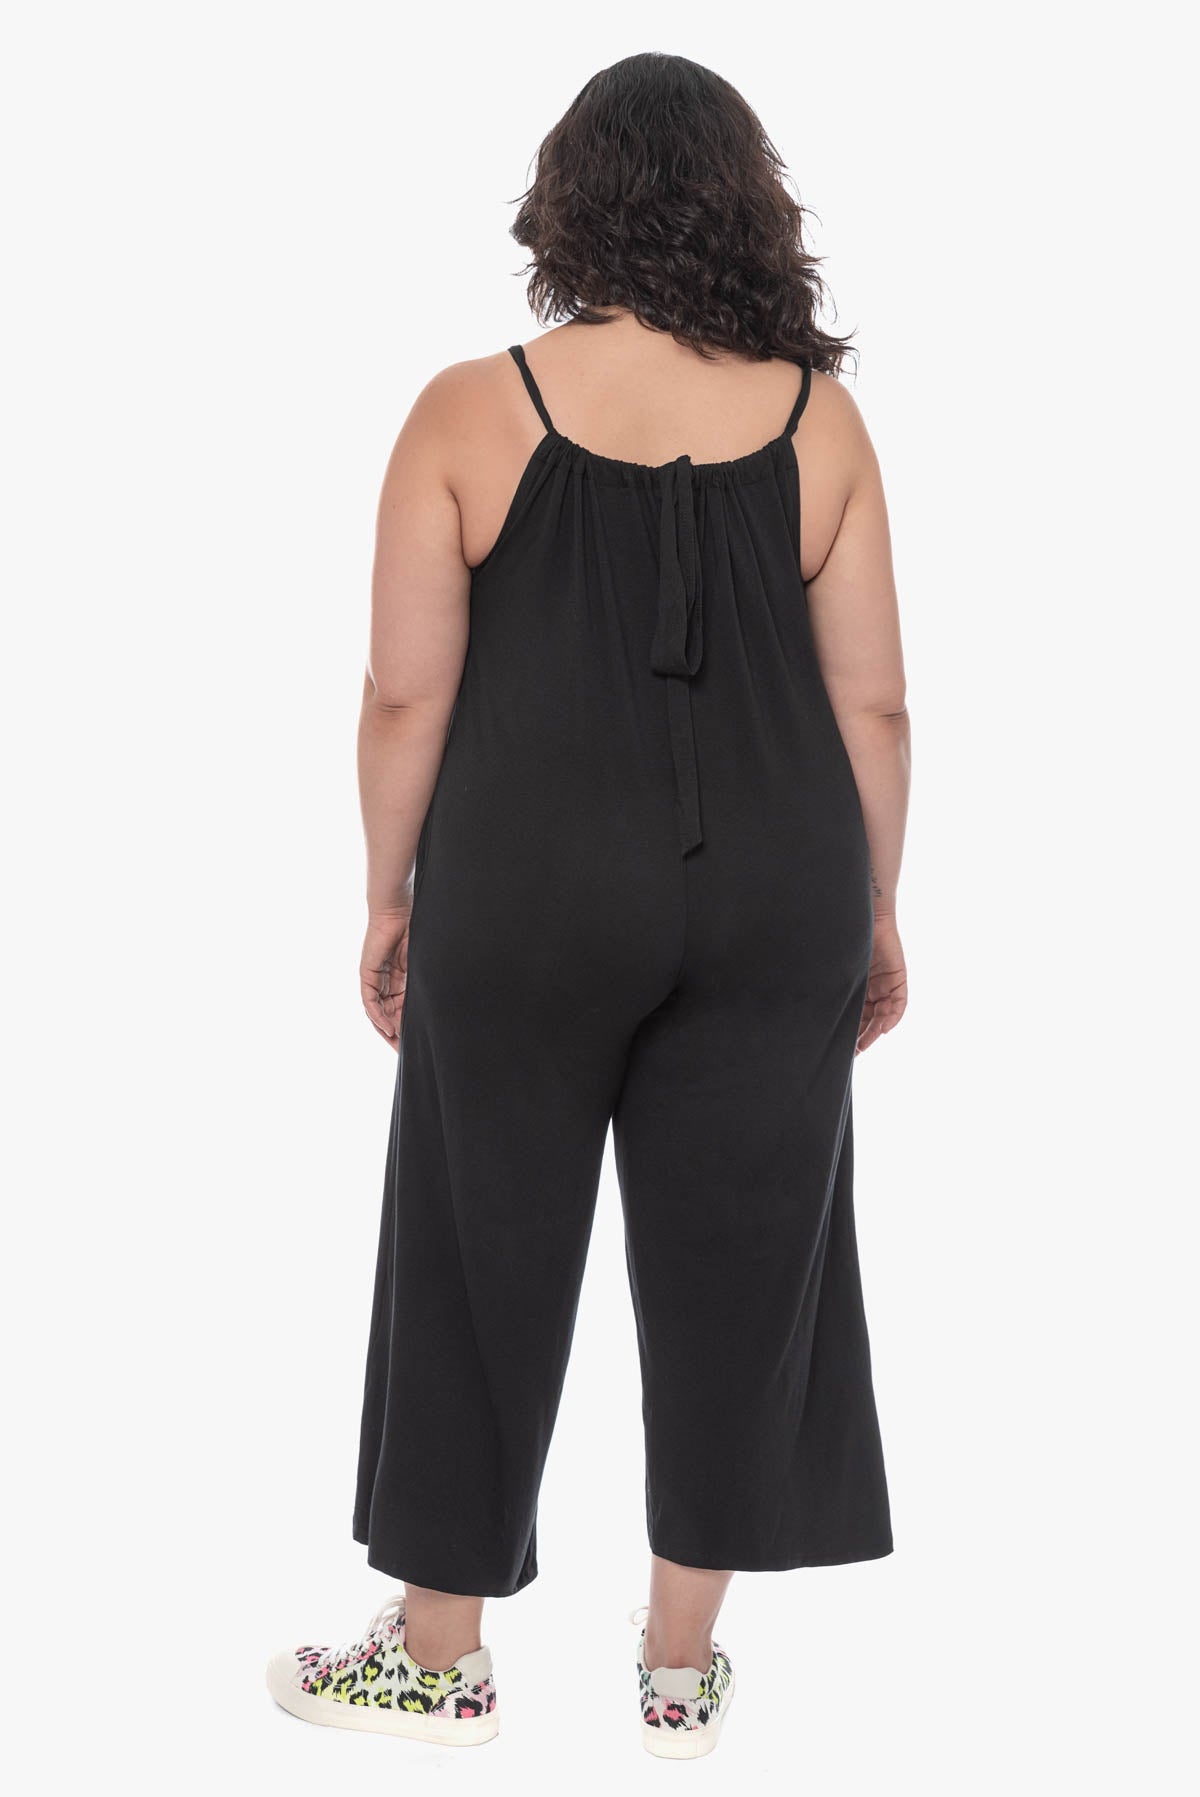 DELORES relaxed fit jumpsuit